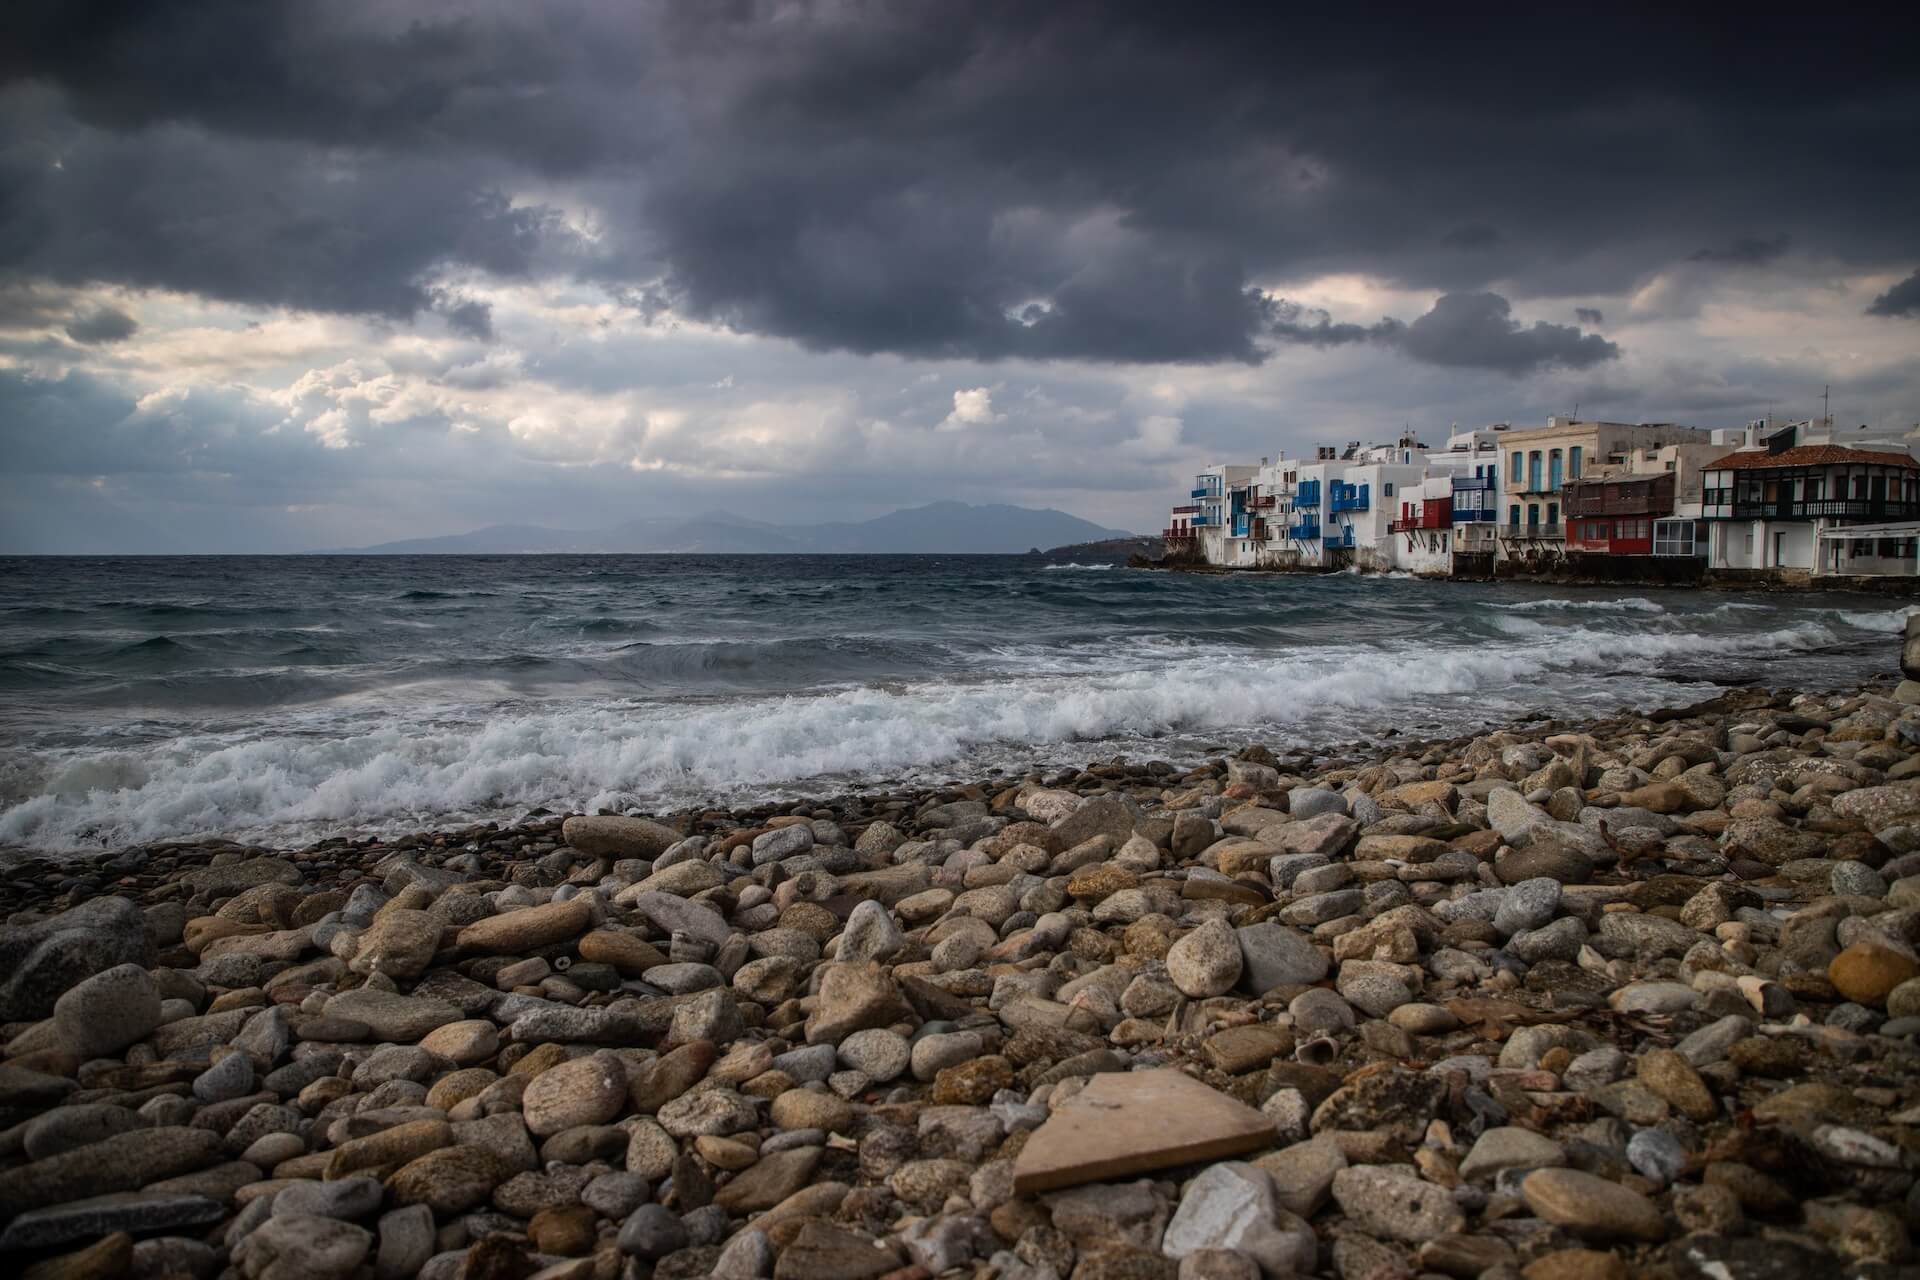 The coast of Mykonos in the winter, clouds, and houses in the distance